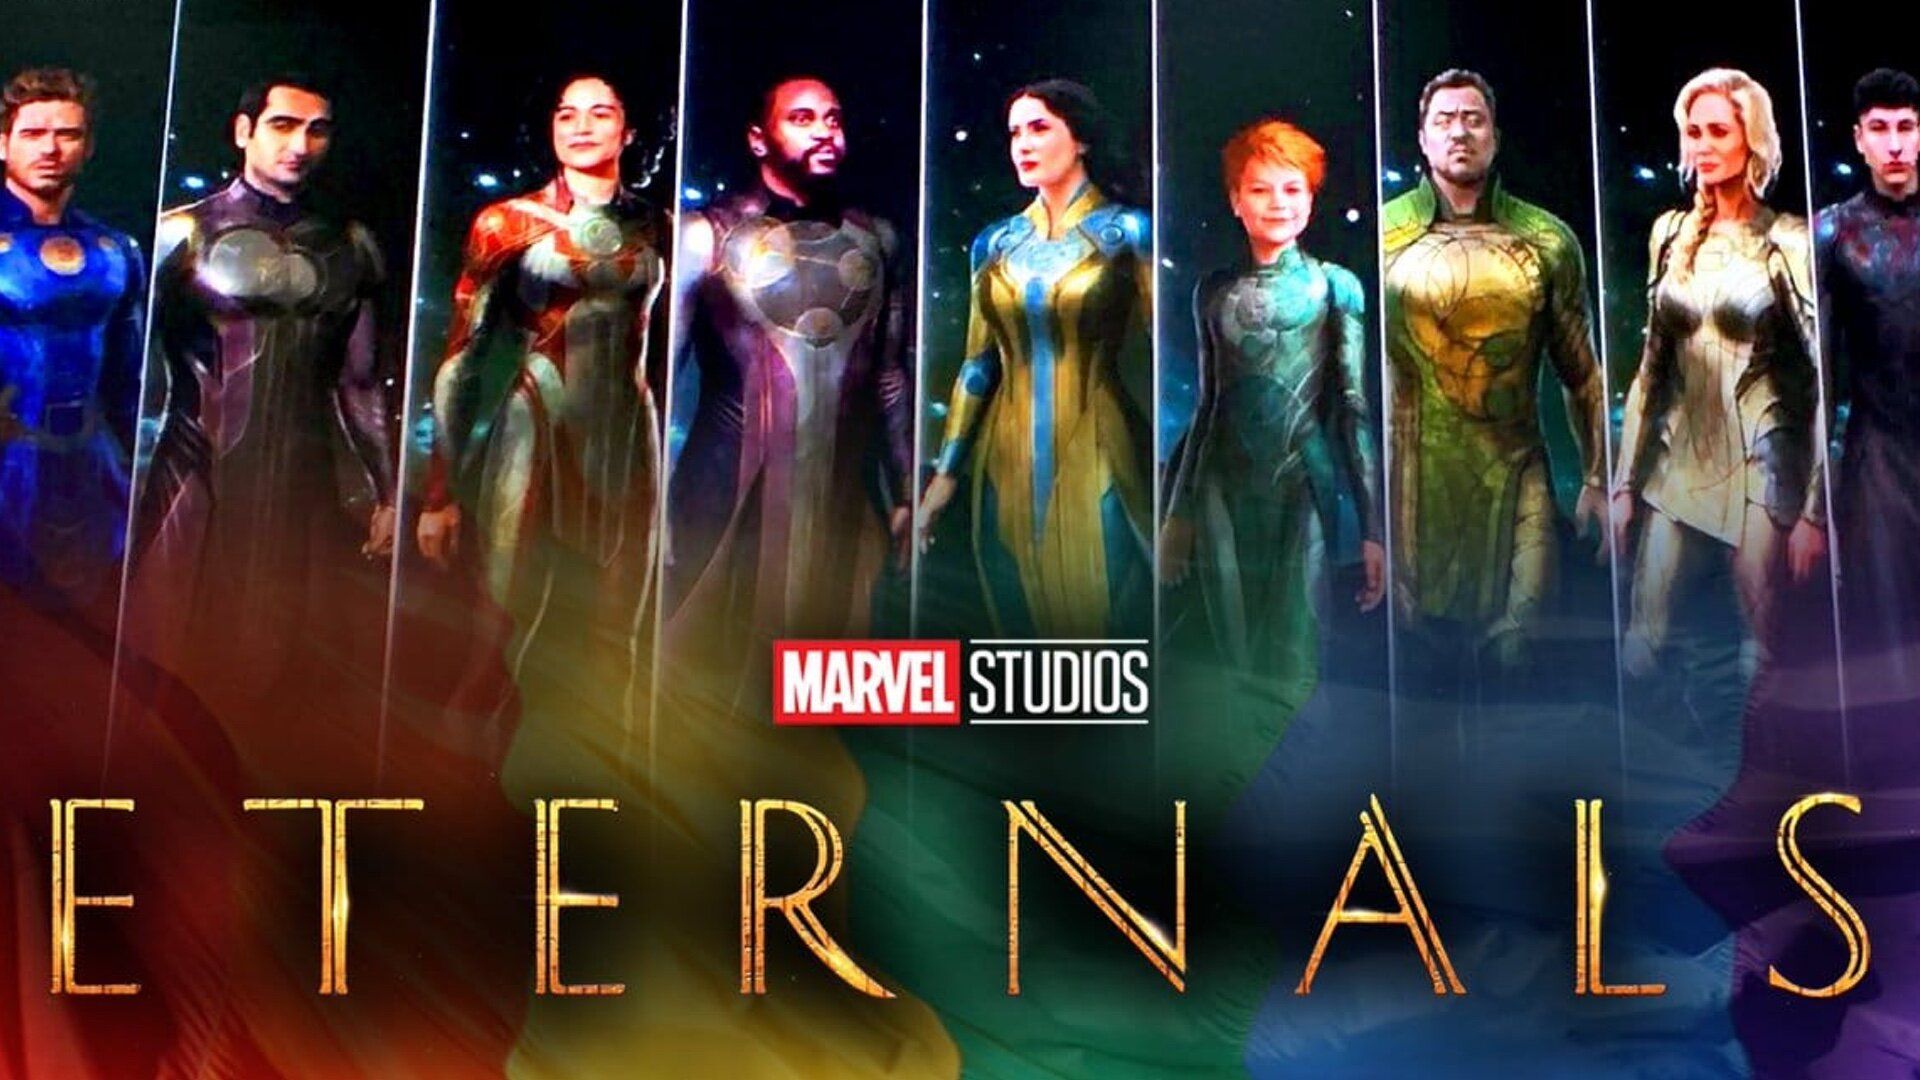 New Character Details Shared for Marvel's ETERNALS